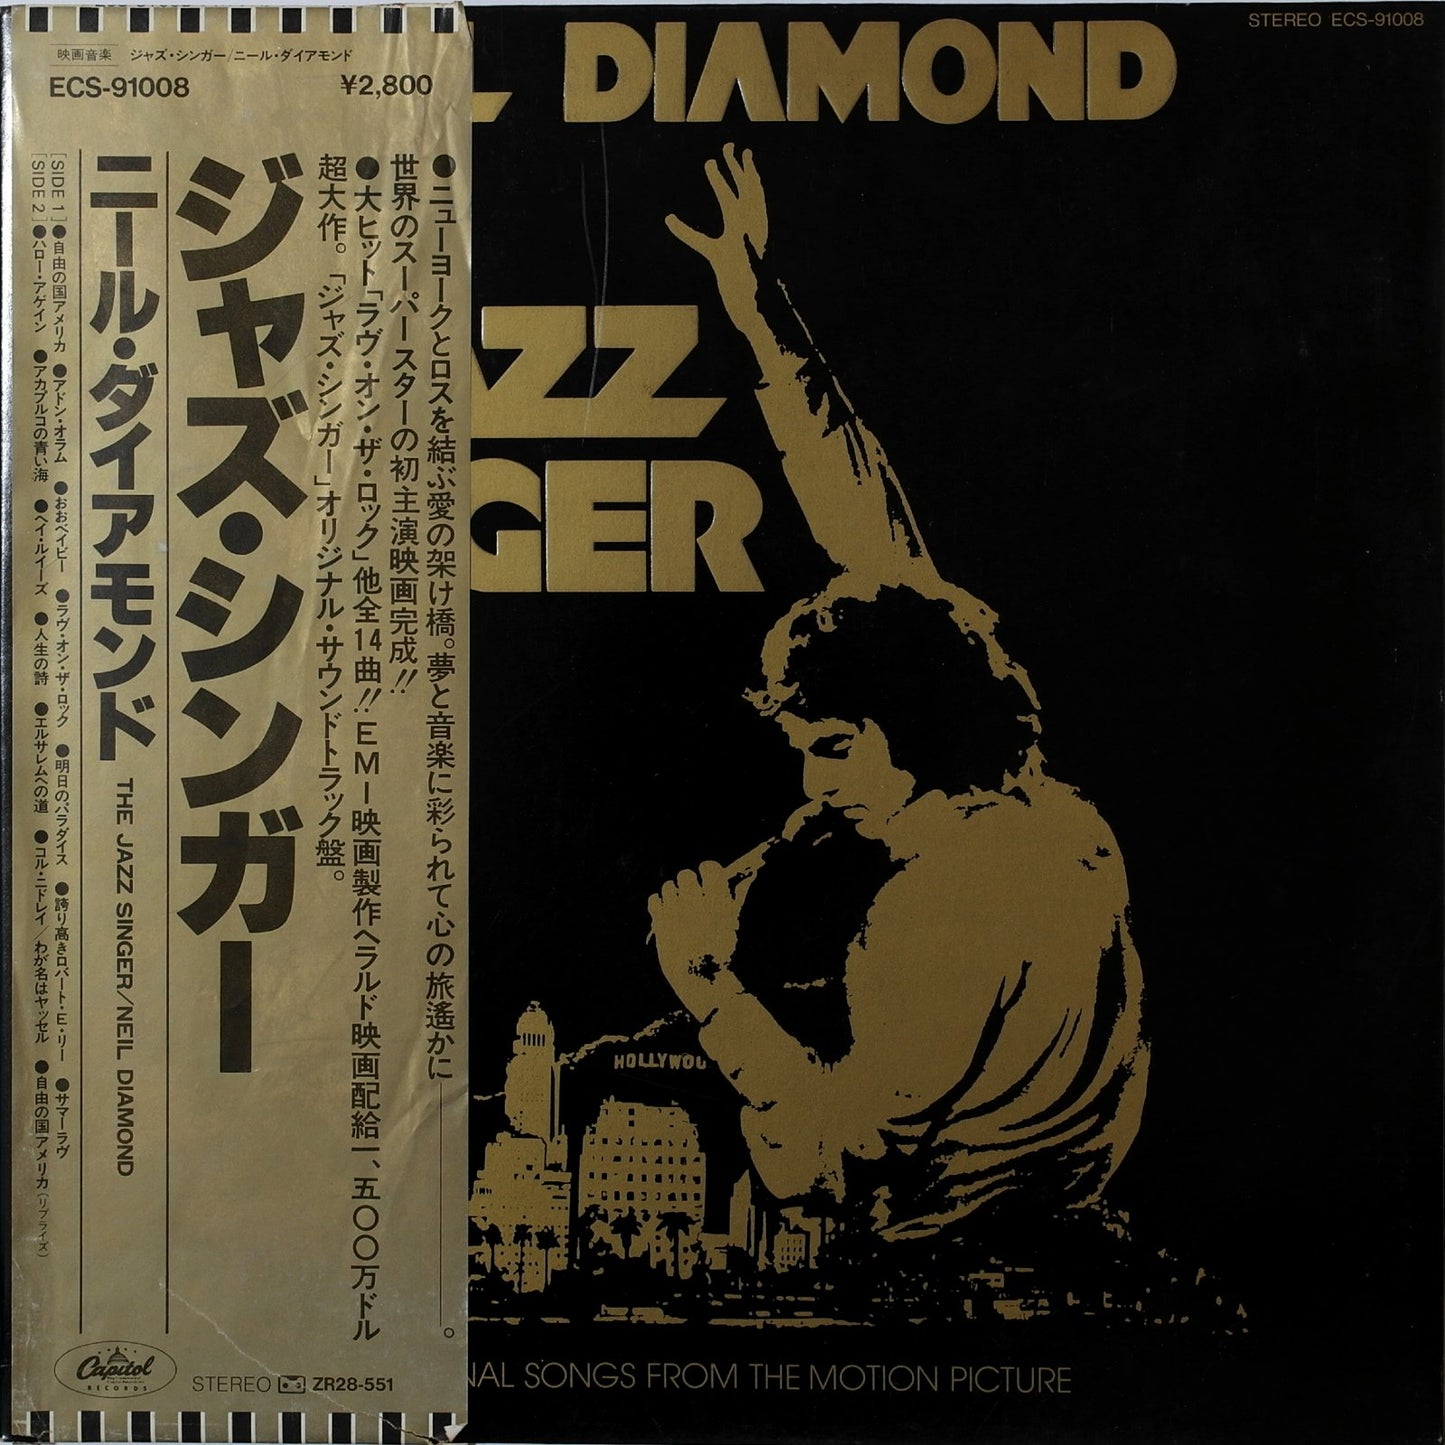 NEIL DIAMOND - The Jazz Singer (Original Songs From The Motion Picture)